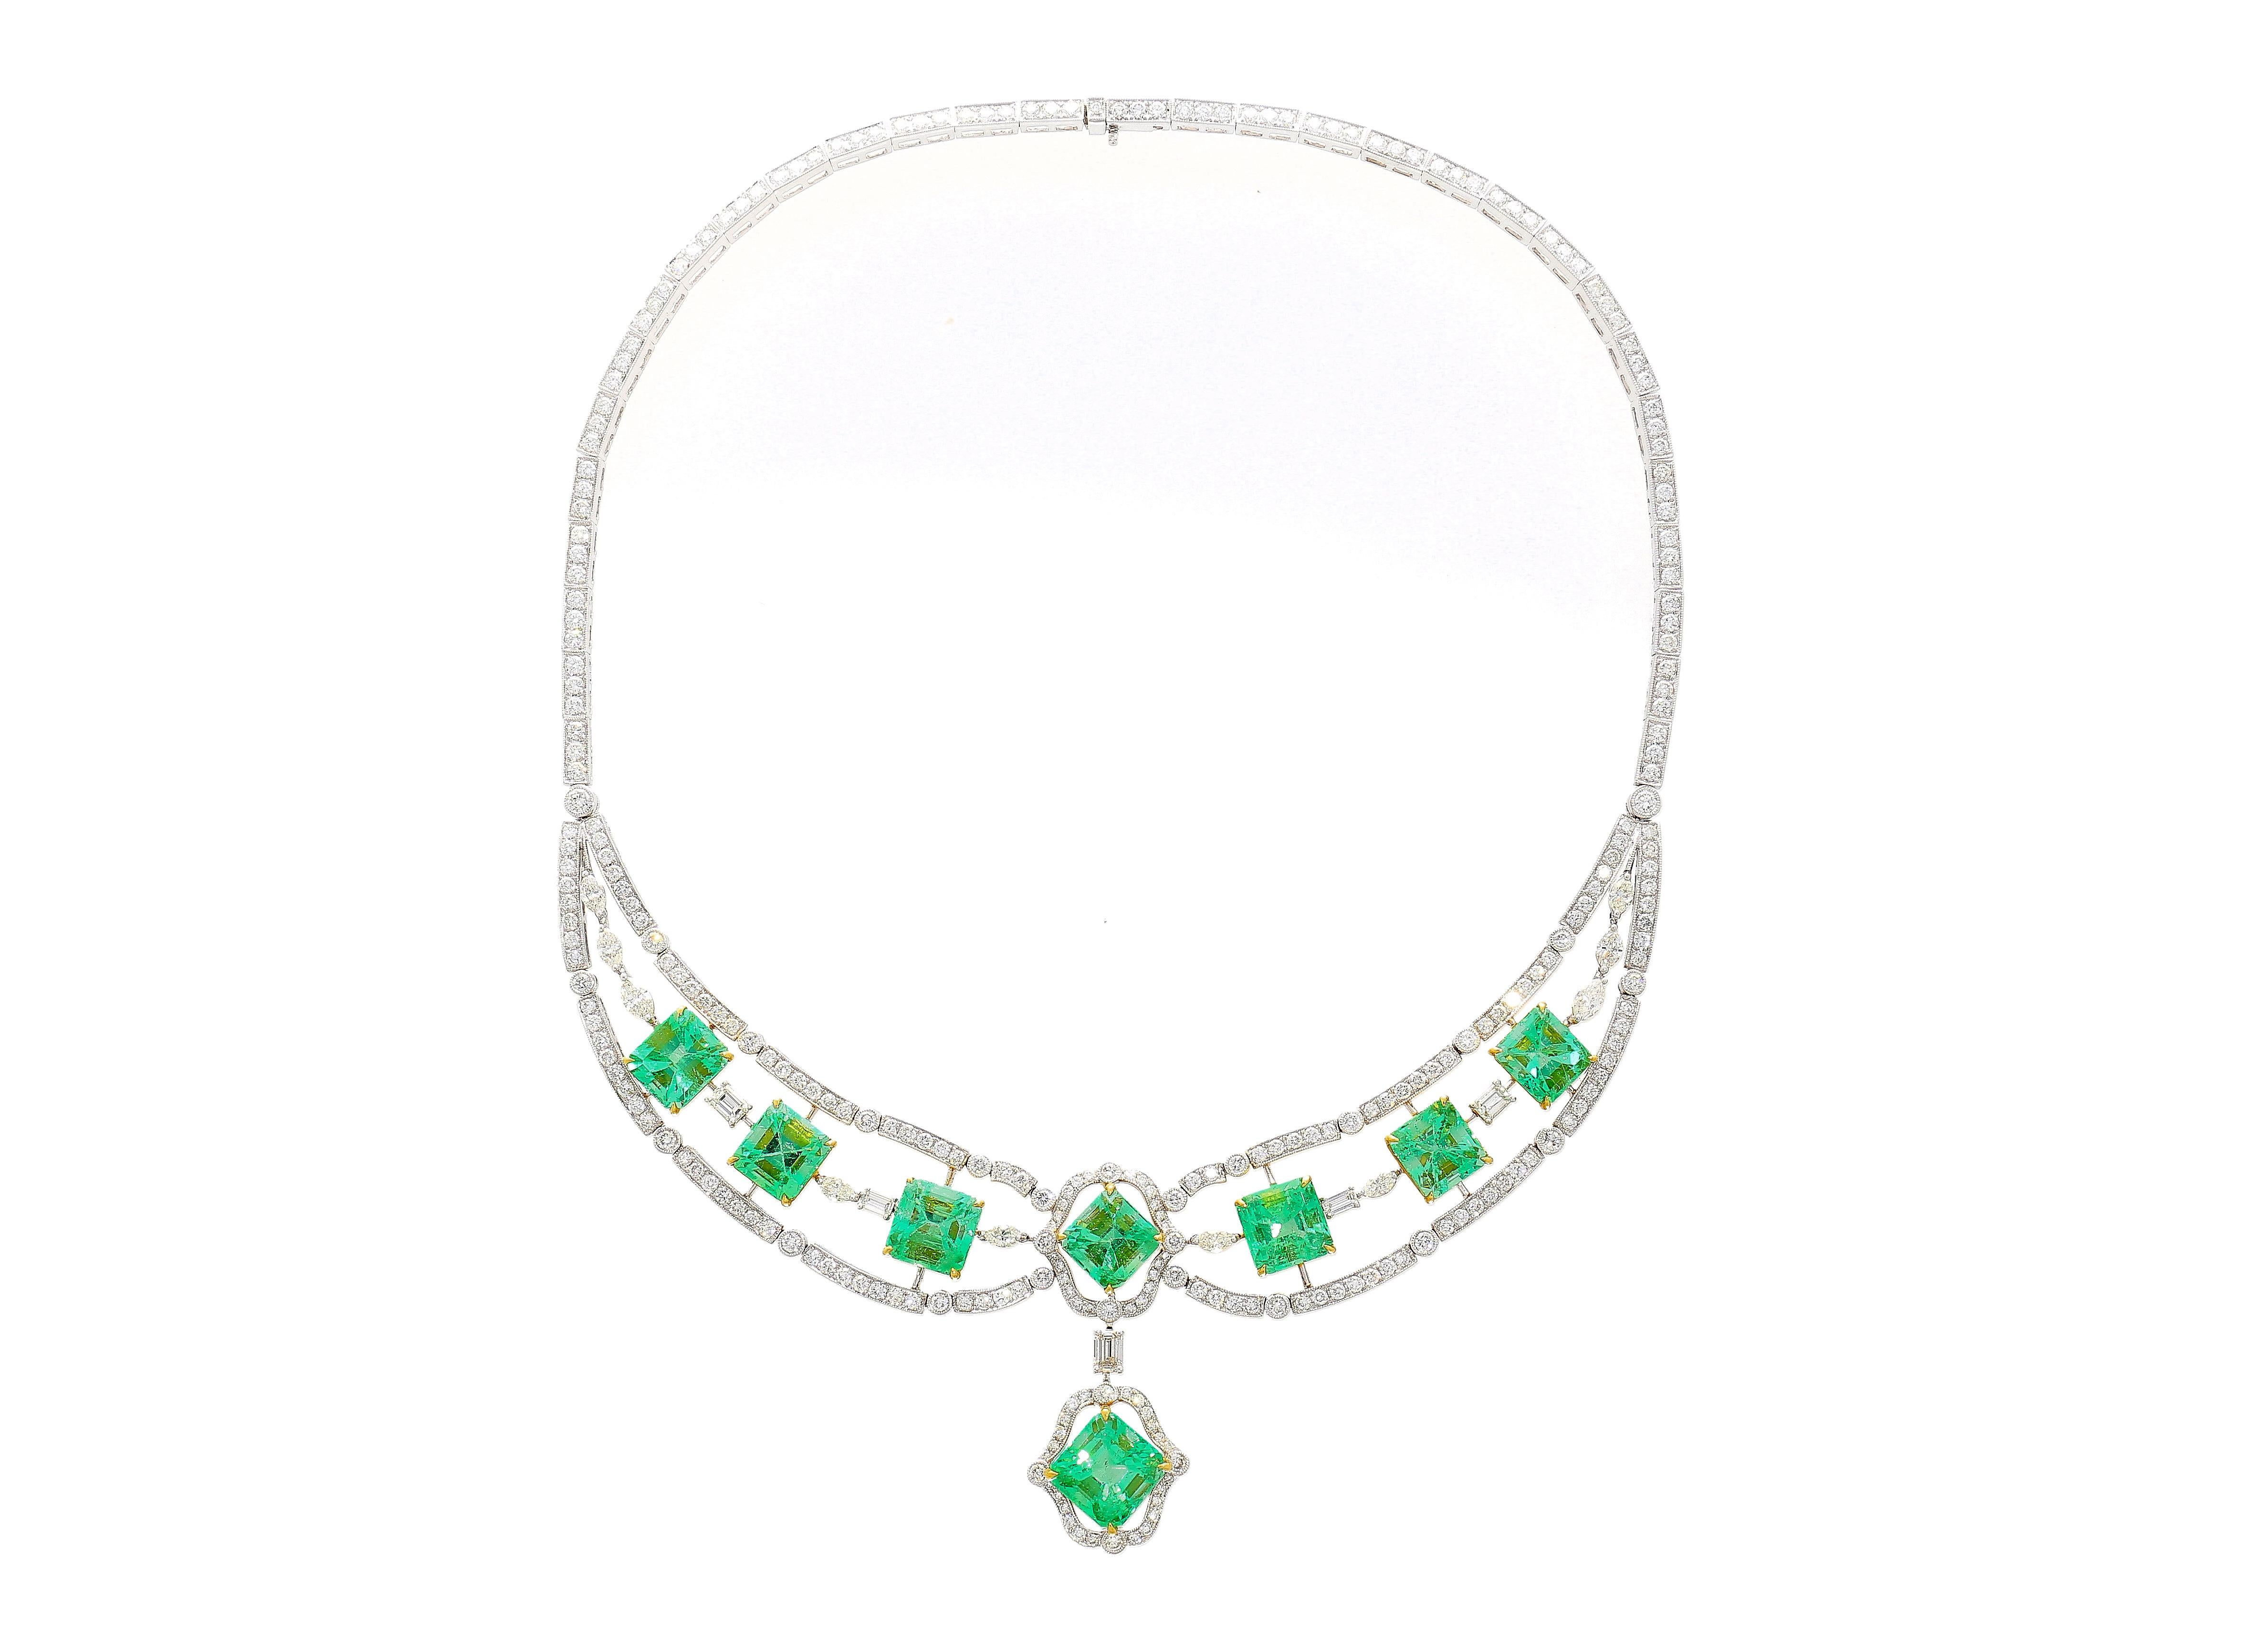 18K White and Yellow Gold Chandelier Necklace, a true embodiment of luxury. Weighing 55.87 grams and spanning 15 inches, this masterpiece centers a captivating 6.21 Carat Octagonal Emerald Cut Emerald from Colombia.

Featuring eight emerald side